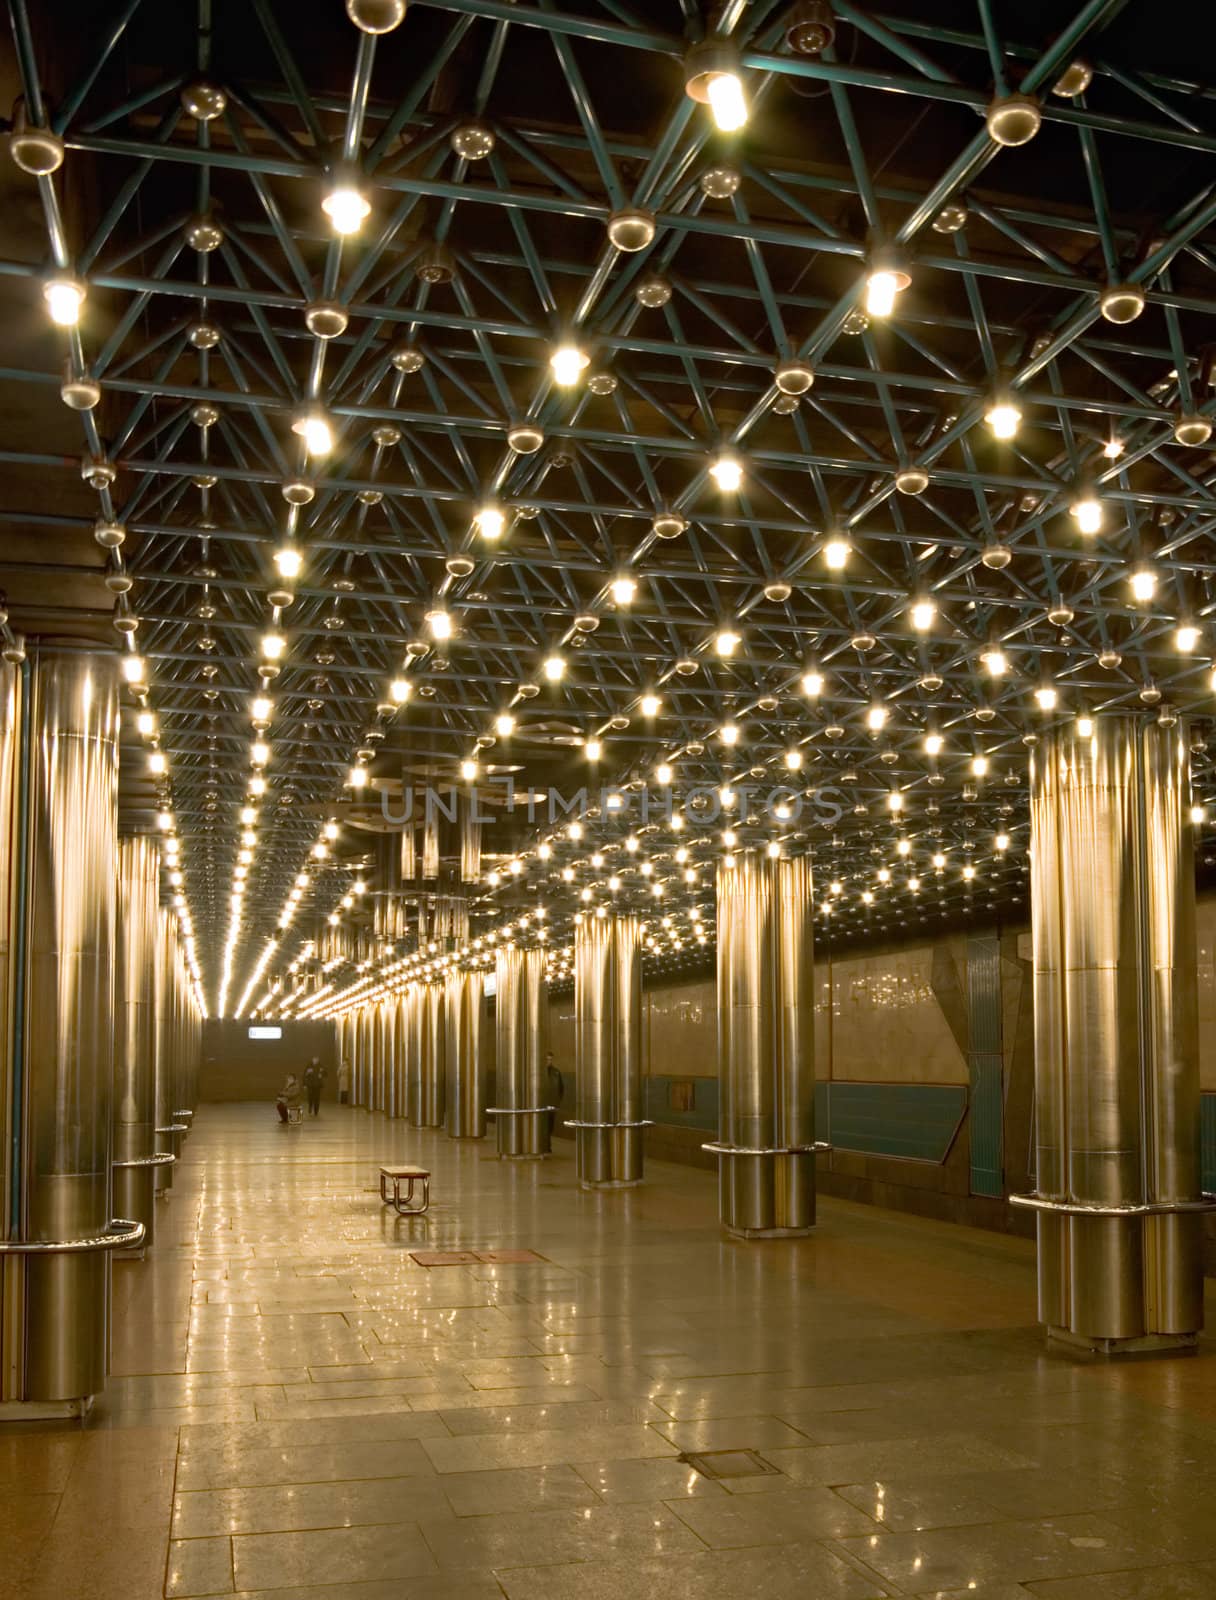 
empty subway station with shiny steel colonnade